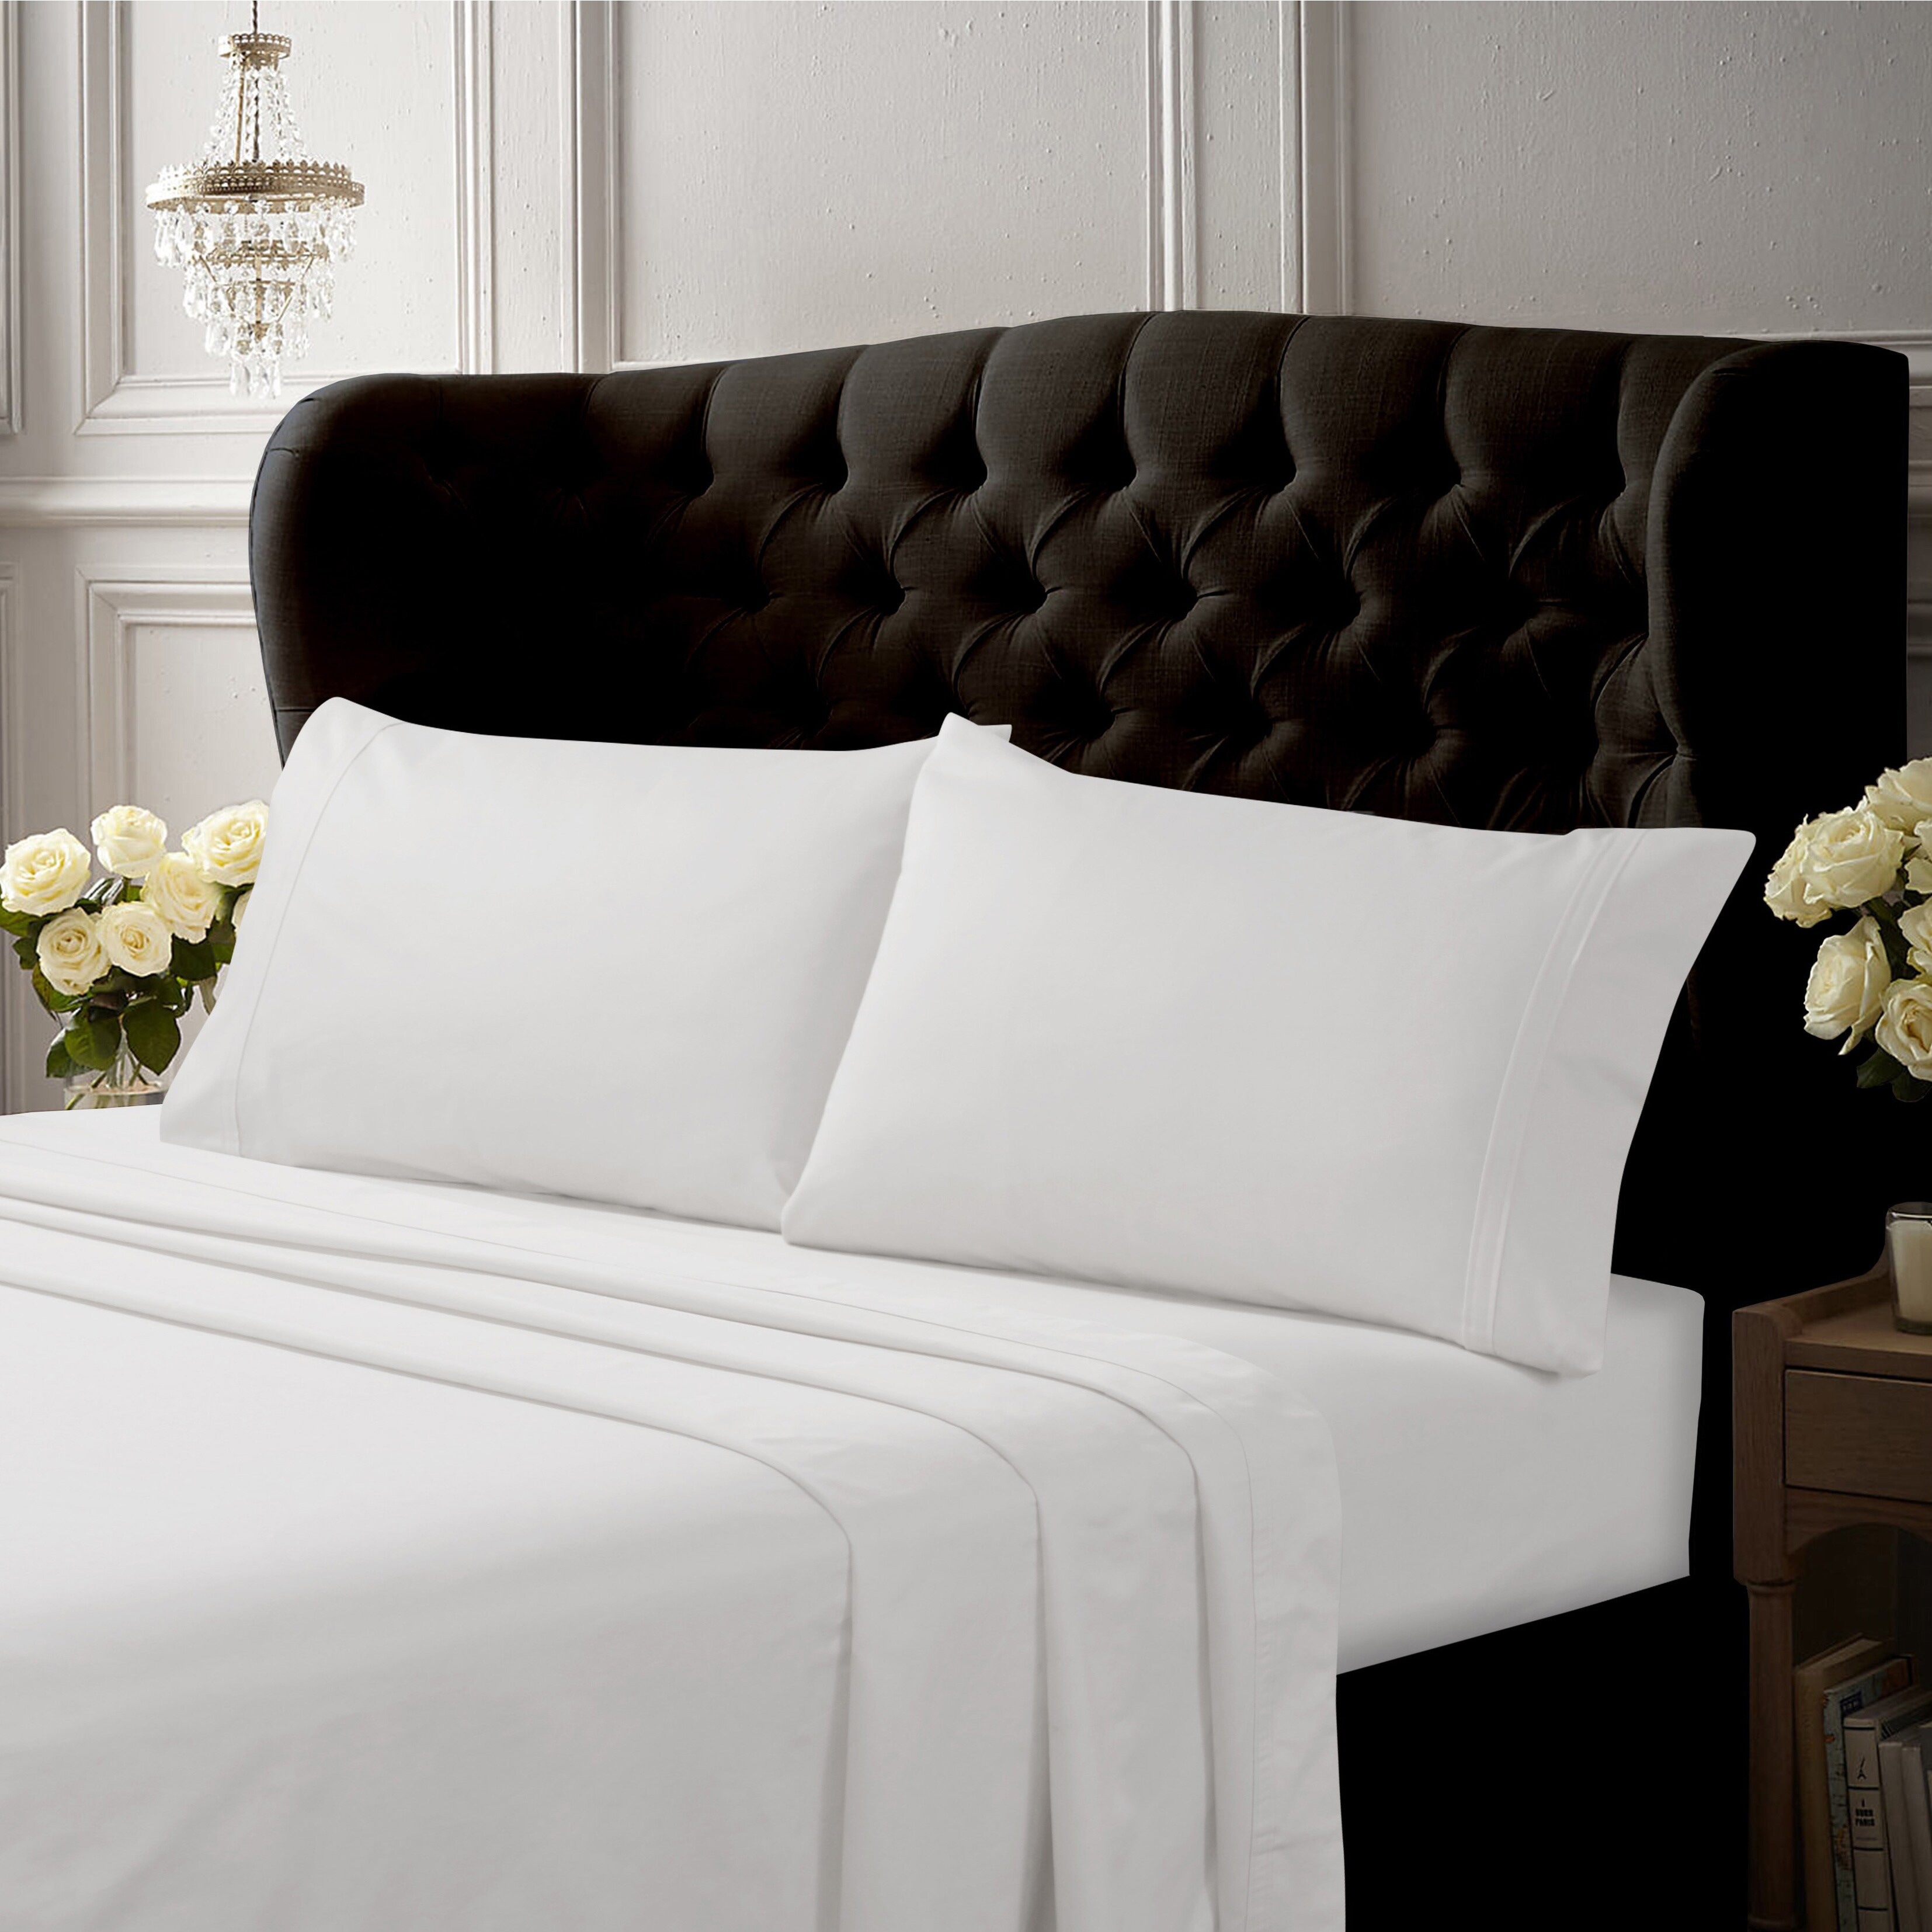 Luxury 400 TC Plain Dyed Extra Deep Bed Sheets 100% Pure Egyptian Cotton